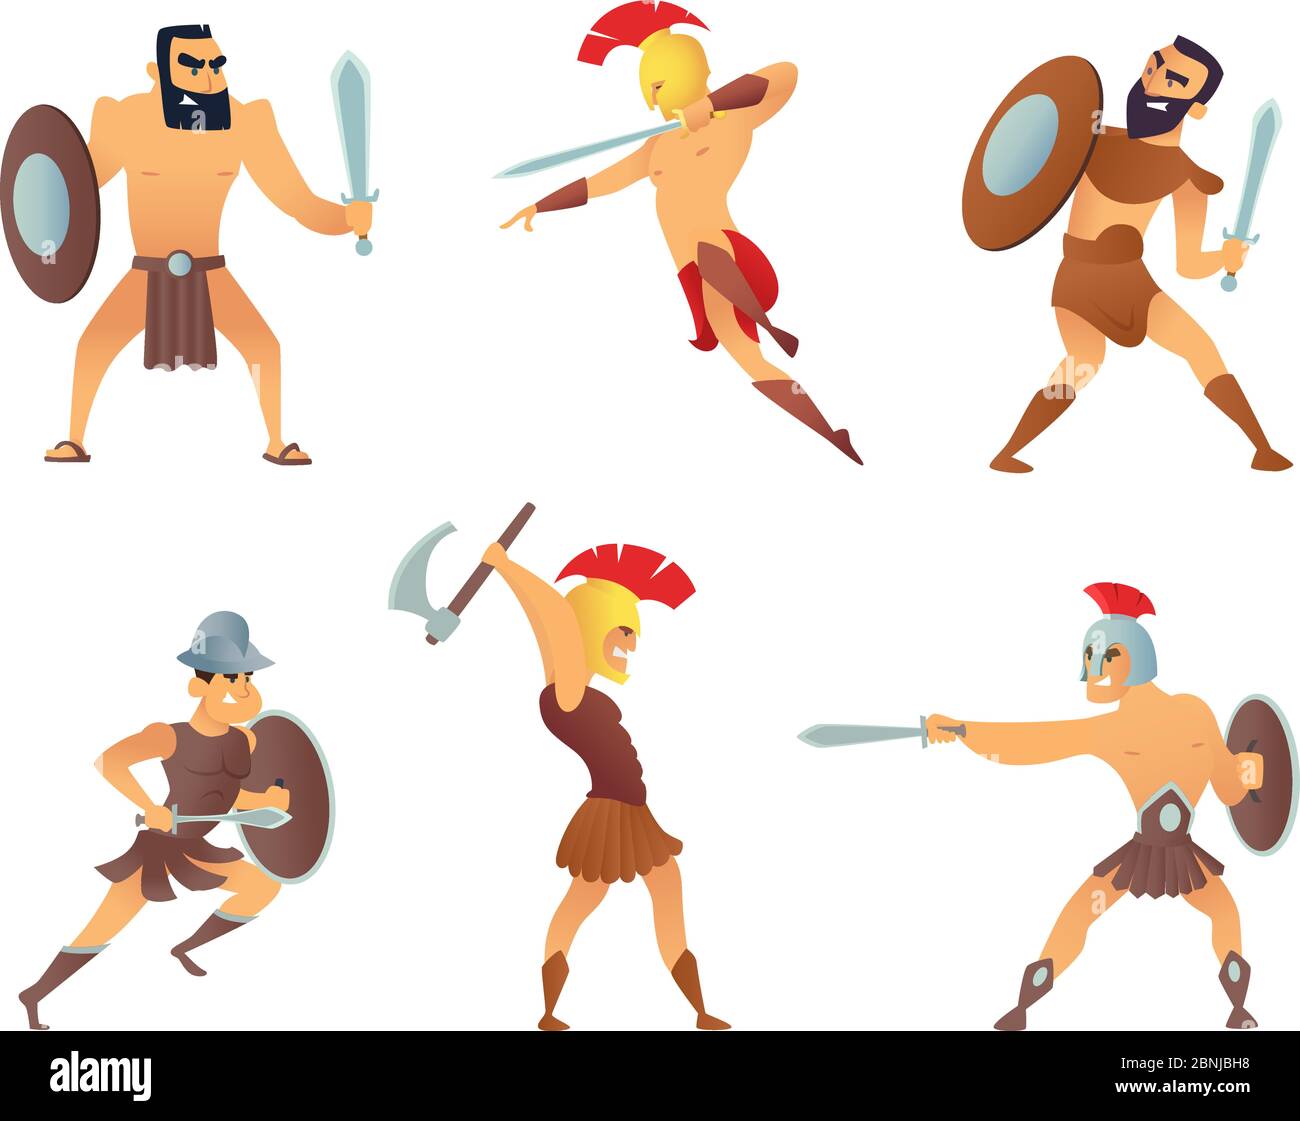 Gladiators holding swords. Fighting characters in action poses Stock Vector